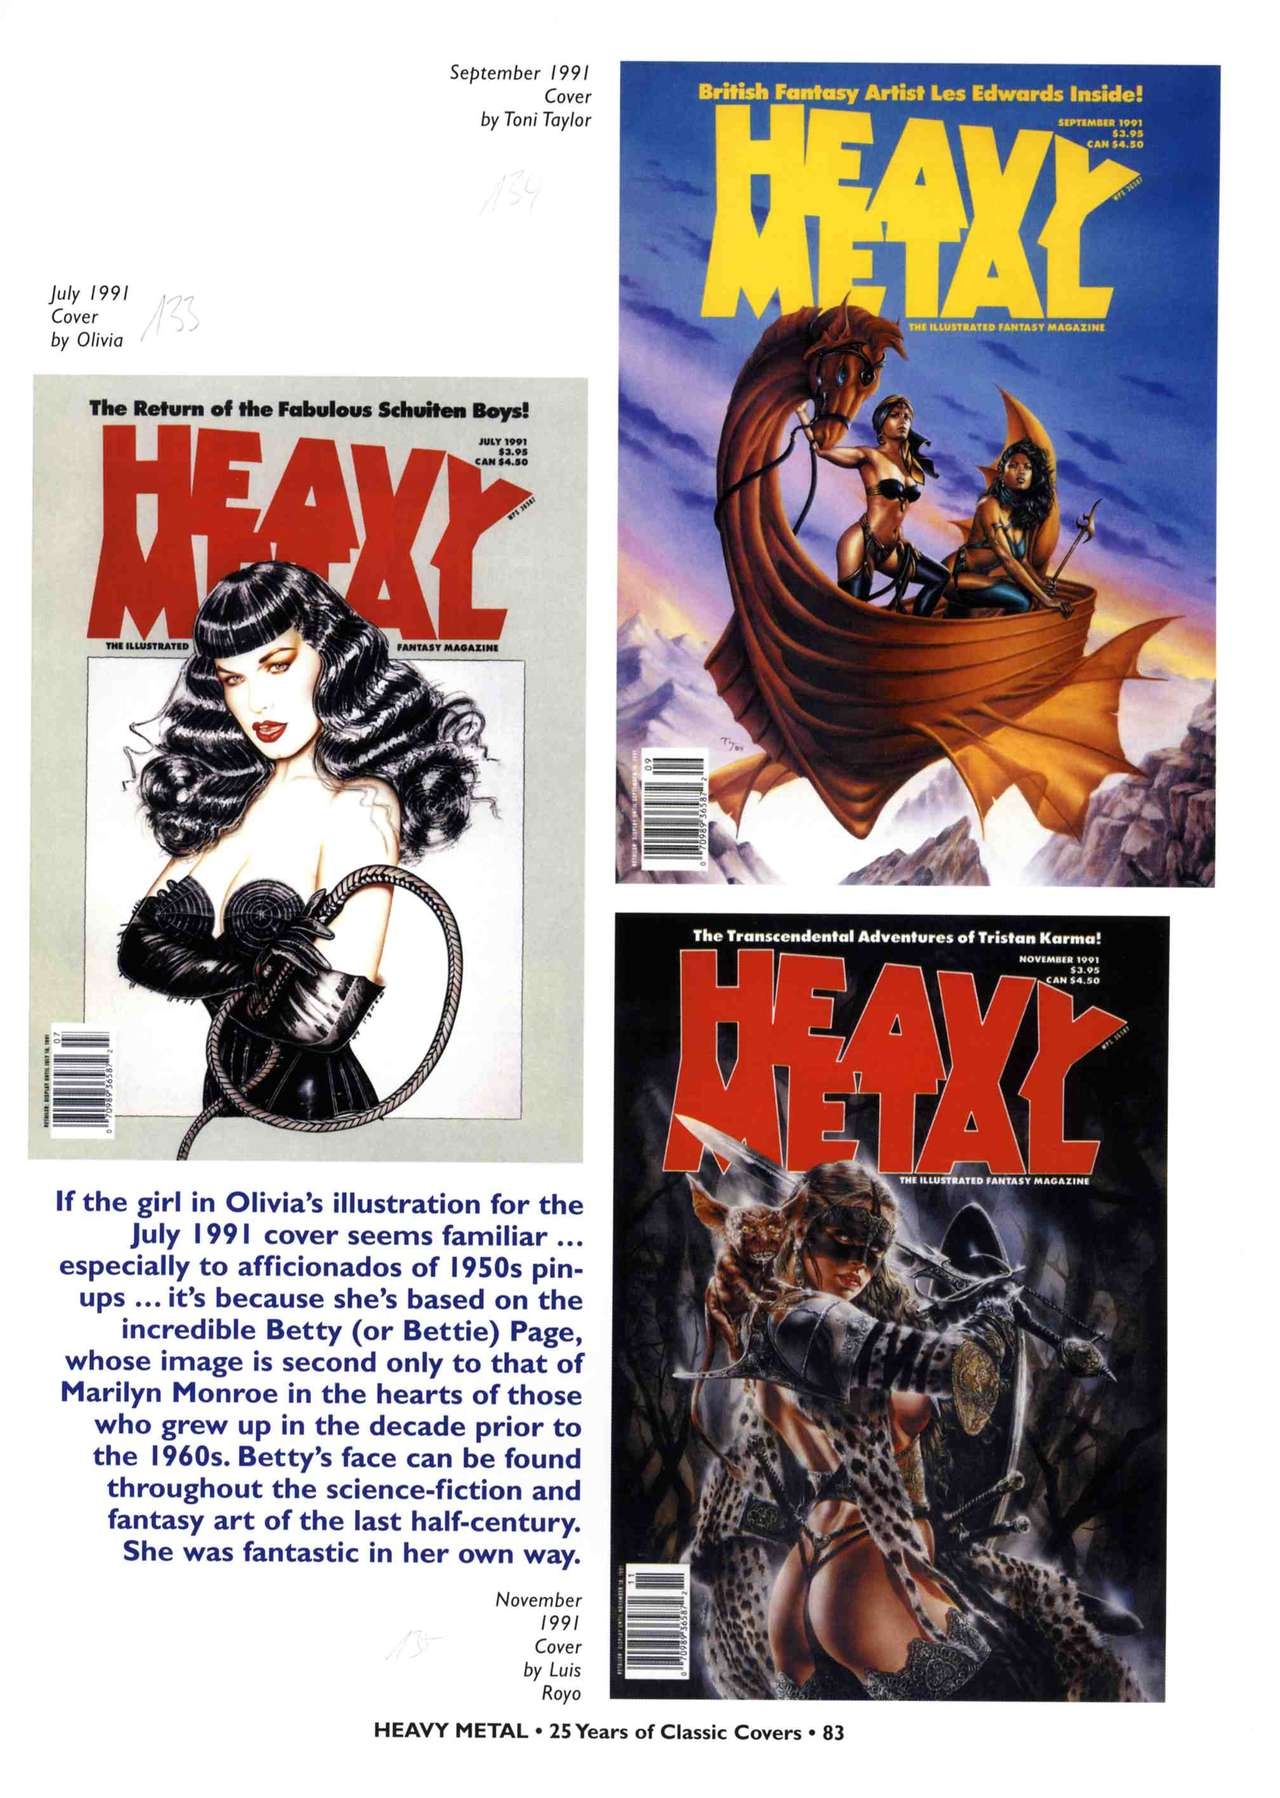 HEAVY METAL 25 Years of Classic Covers 88